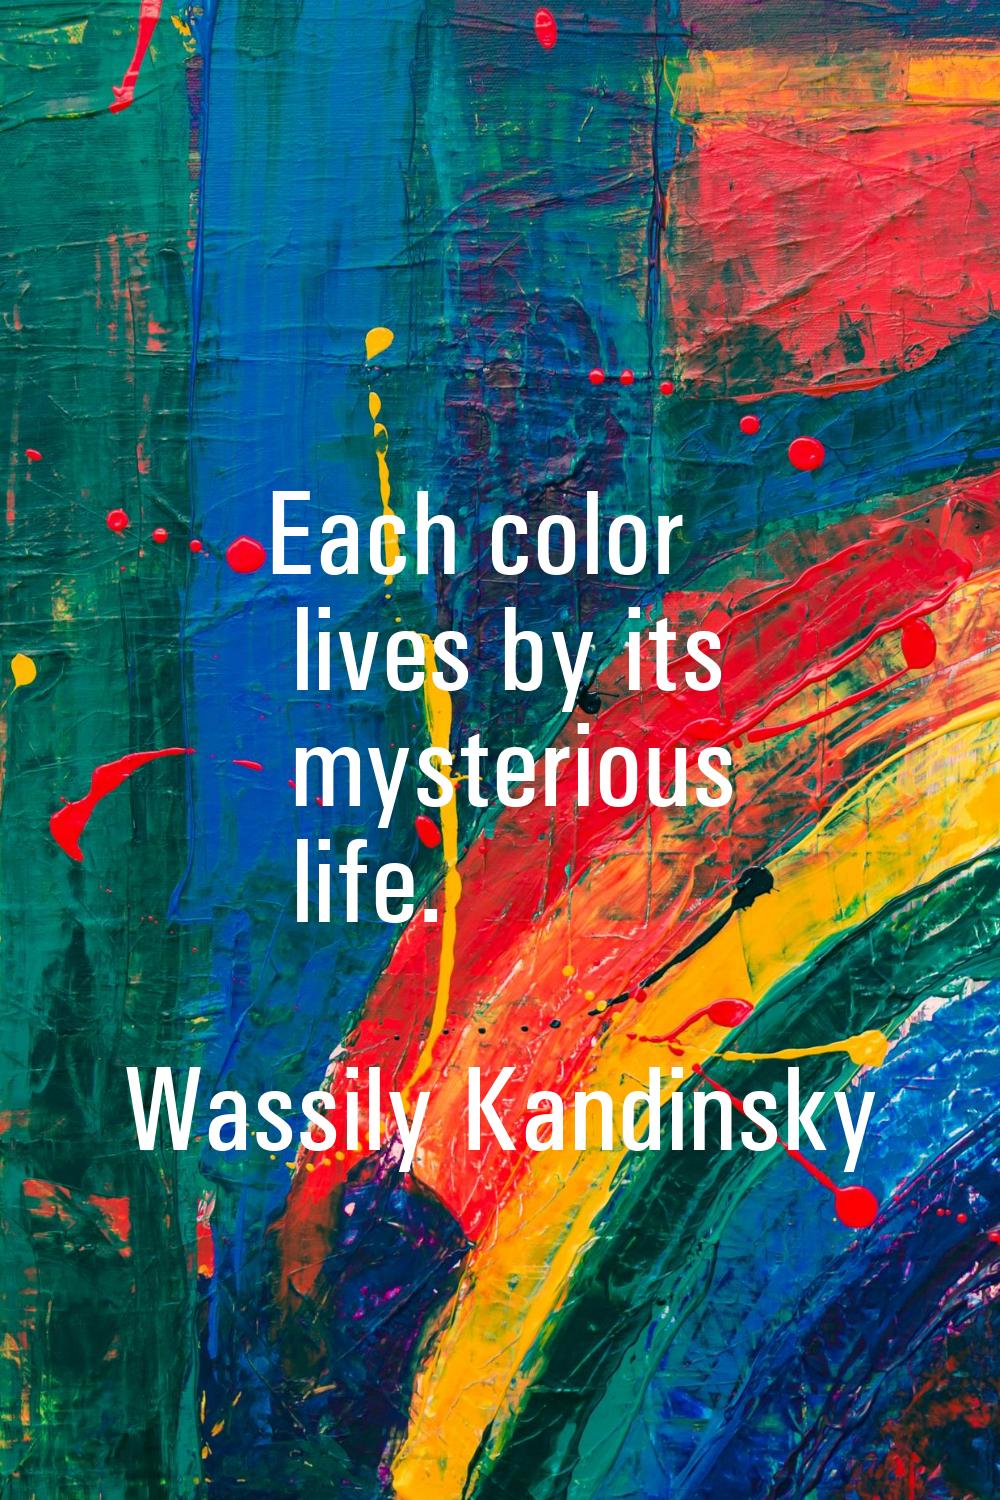 Each color lives by its mysterious life.